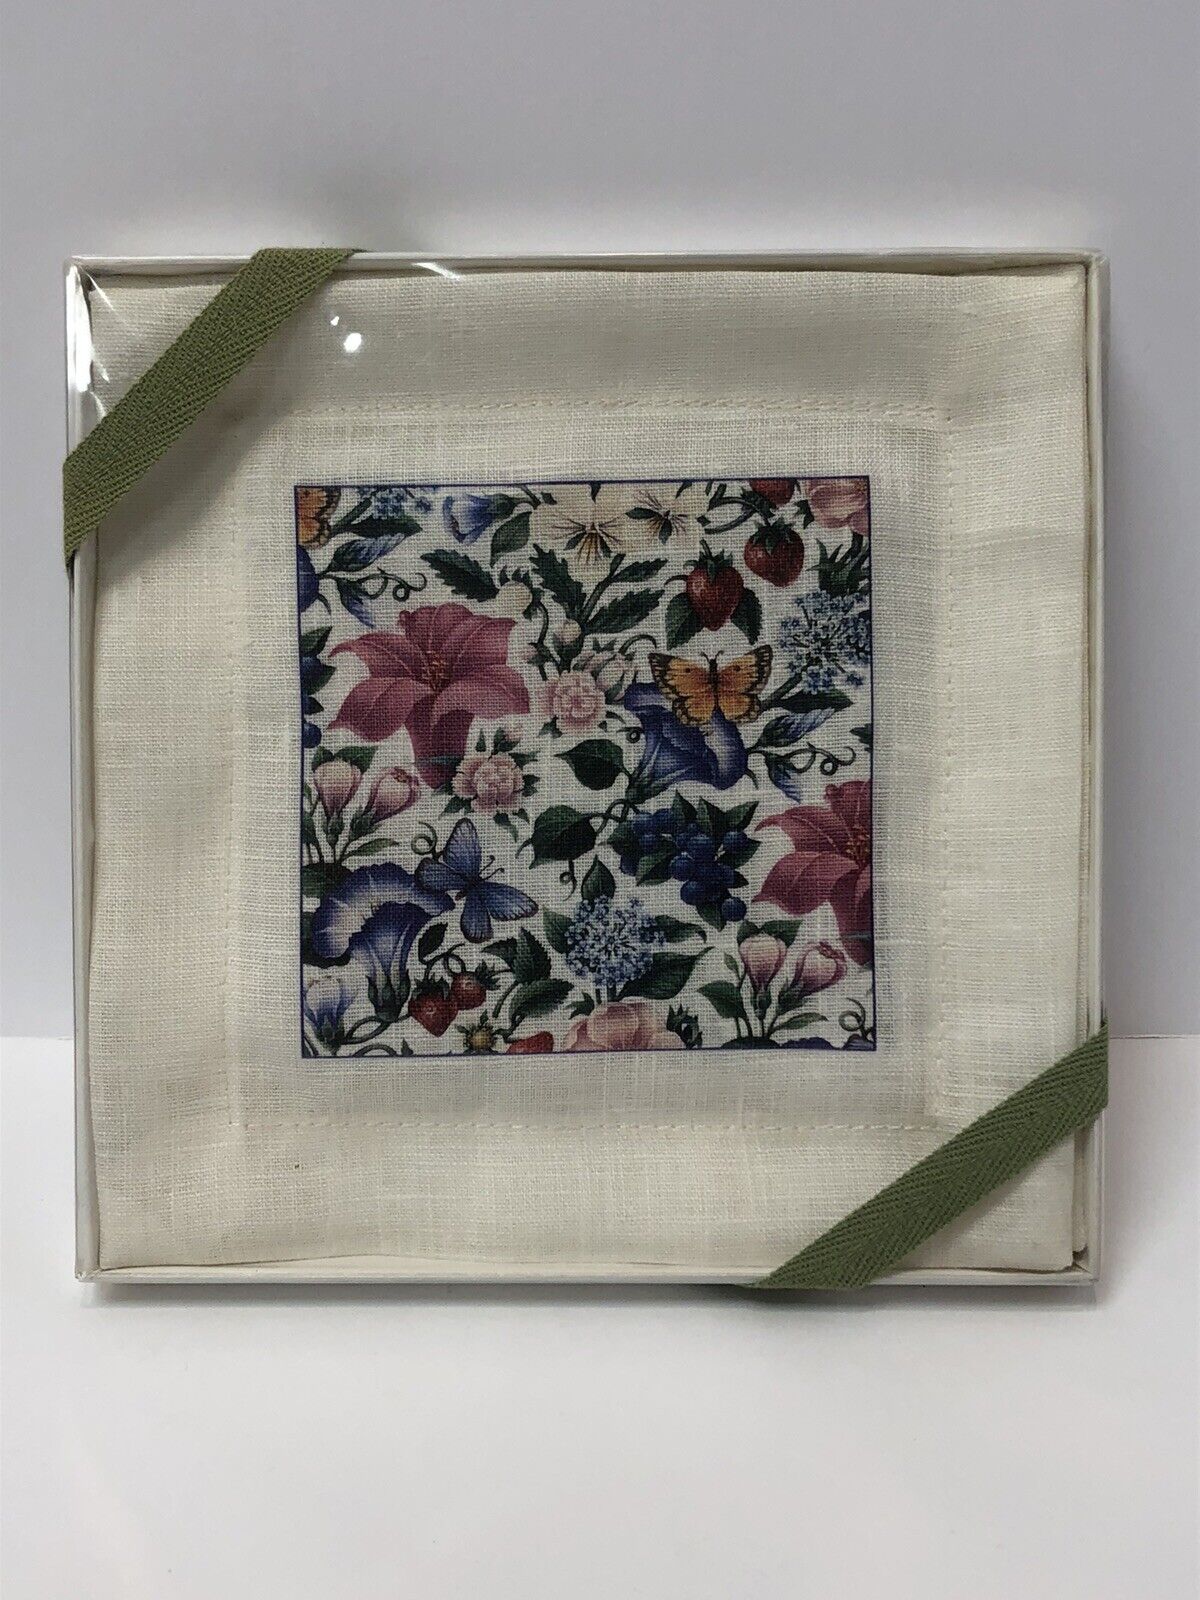 Crabtree & Evelyn 100% Linen Floral Coasters Wildflowers  Napkins  Set of 4 NIB